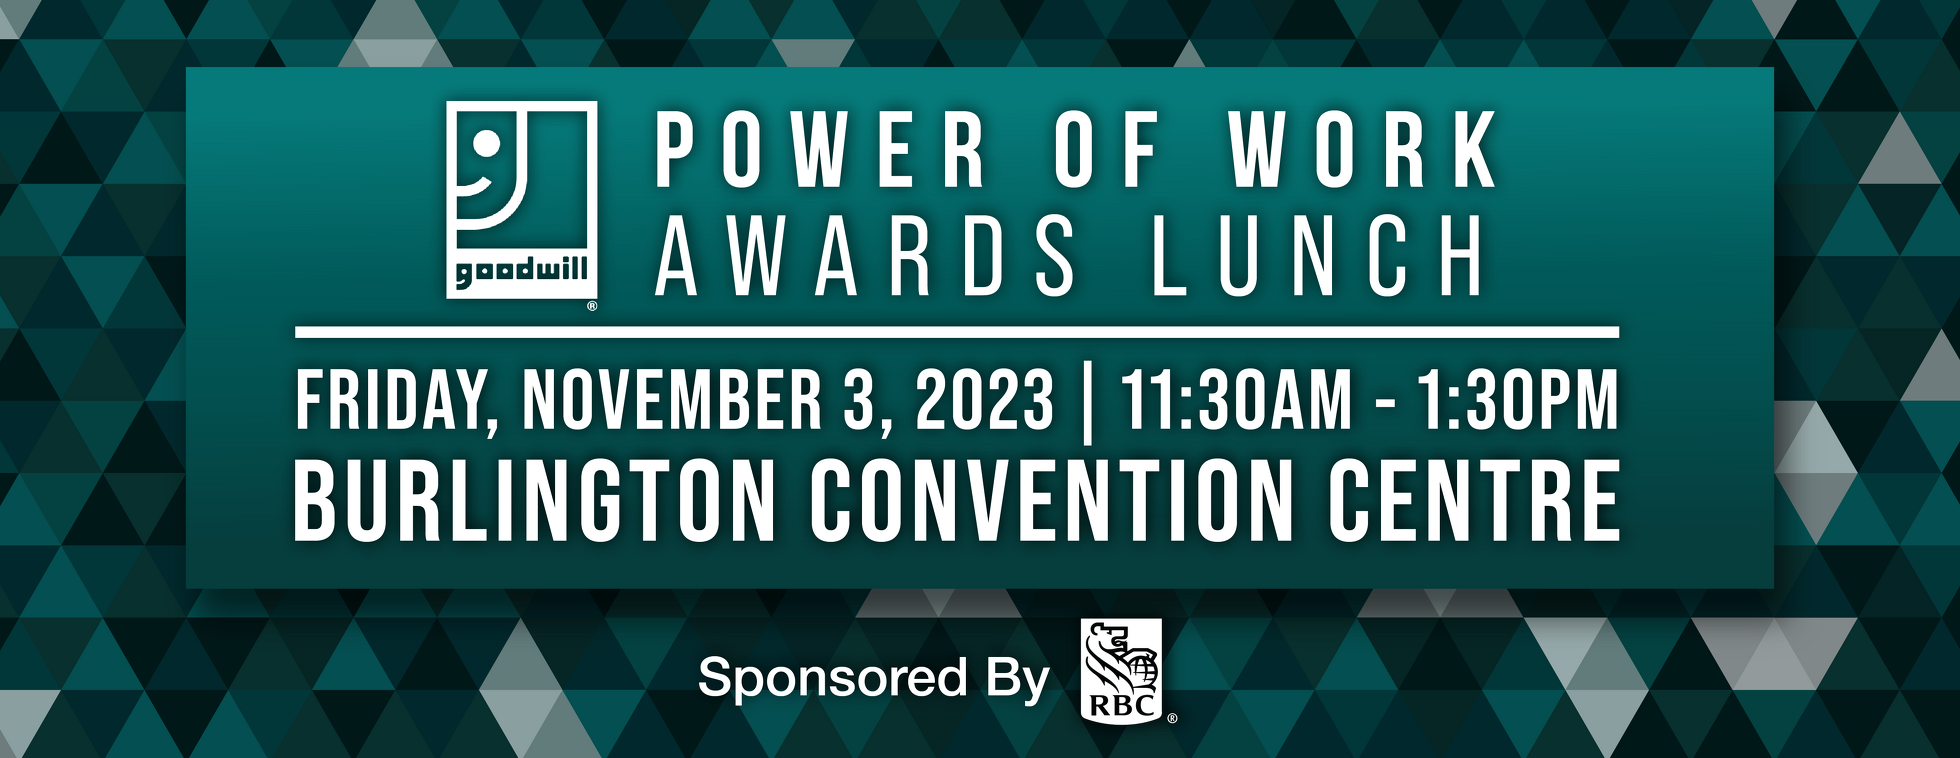 2023 Power of Work Awards Lunch